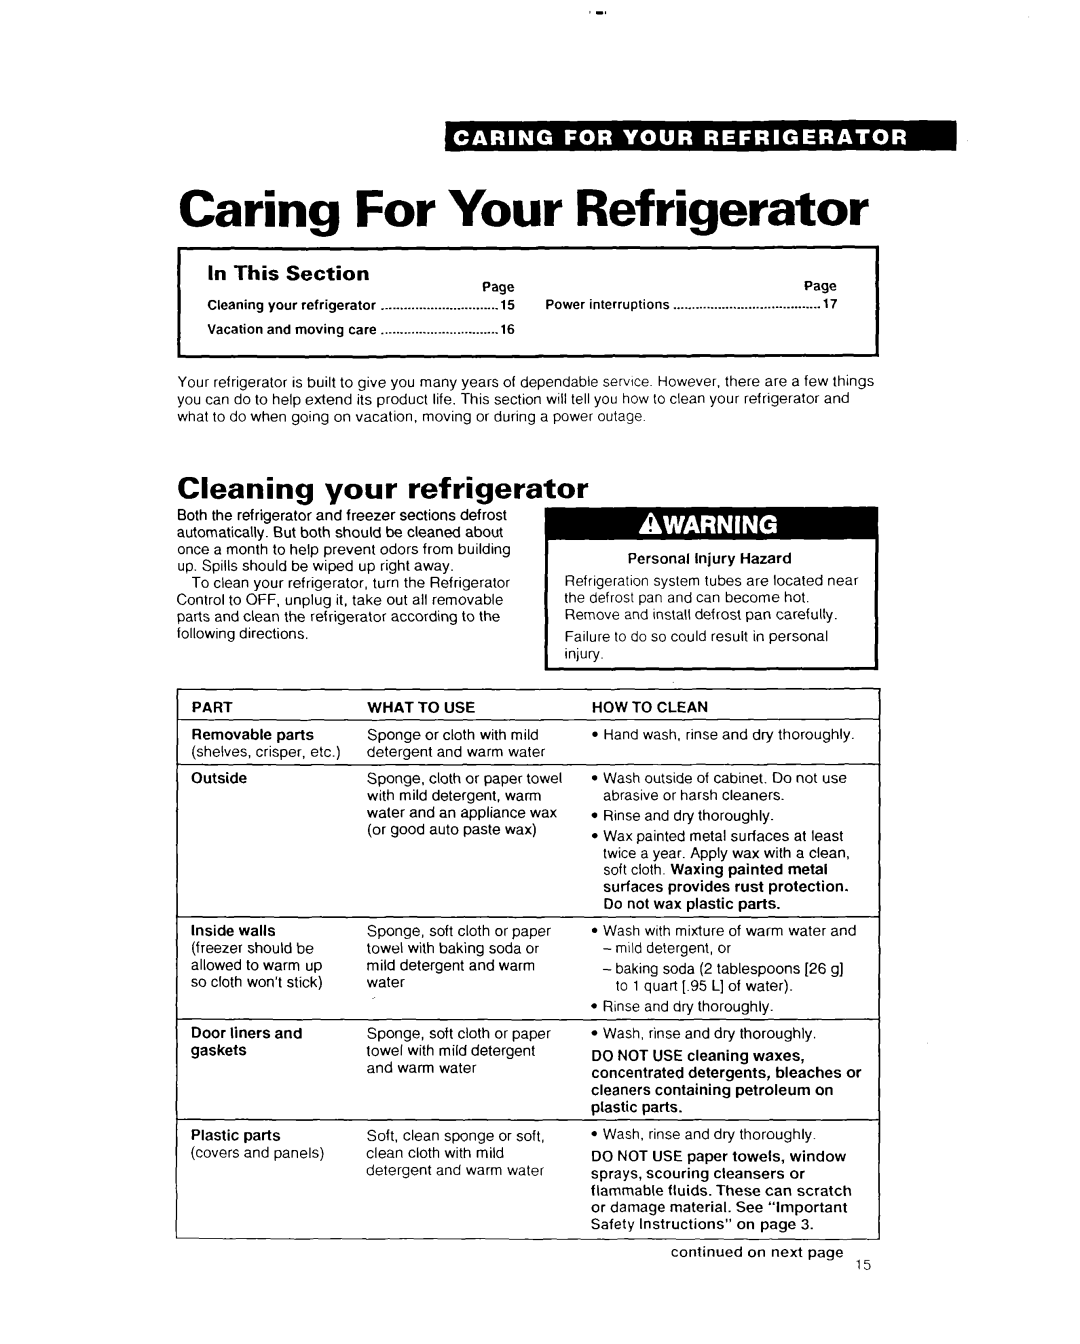 Whirlpool EDZZDK important safety instructions Caring For Your Refrigerator, Cleaning your refrigerator, In This, Section 